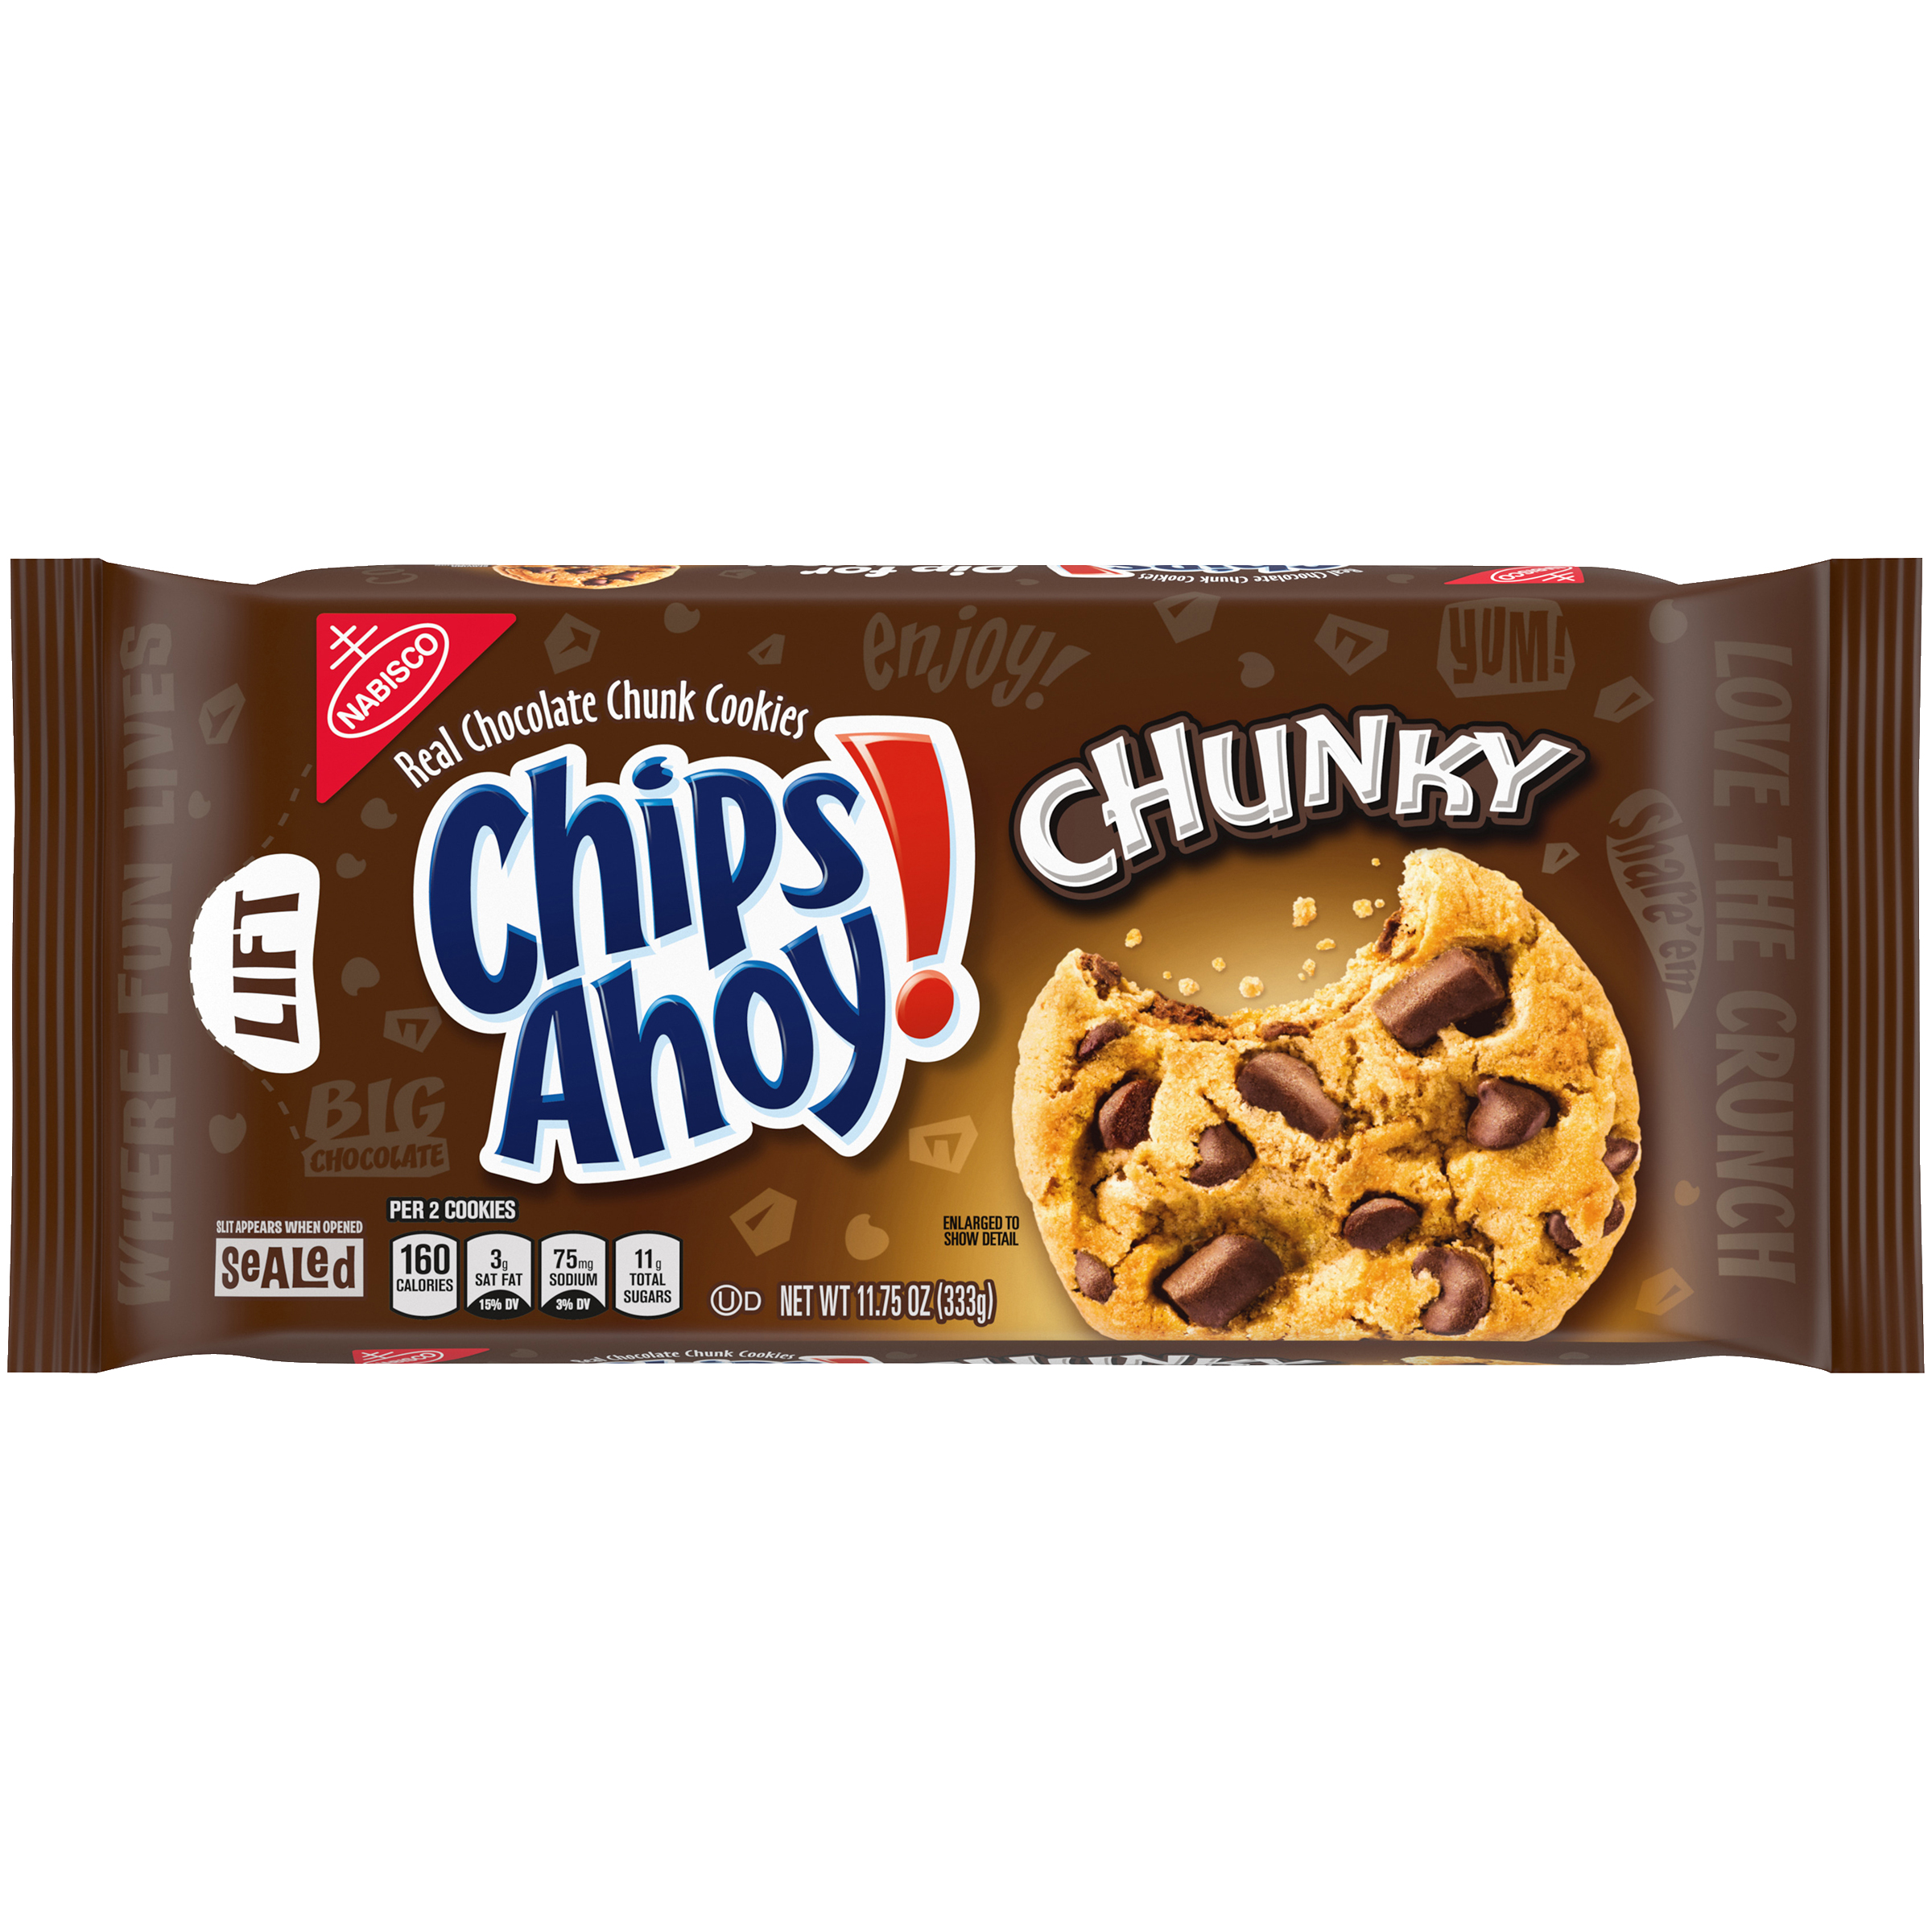 CHIPS AHOY! Chunky Chocolate Chip Cookies, 11.8 oz-1